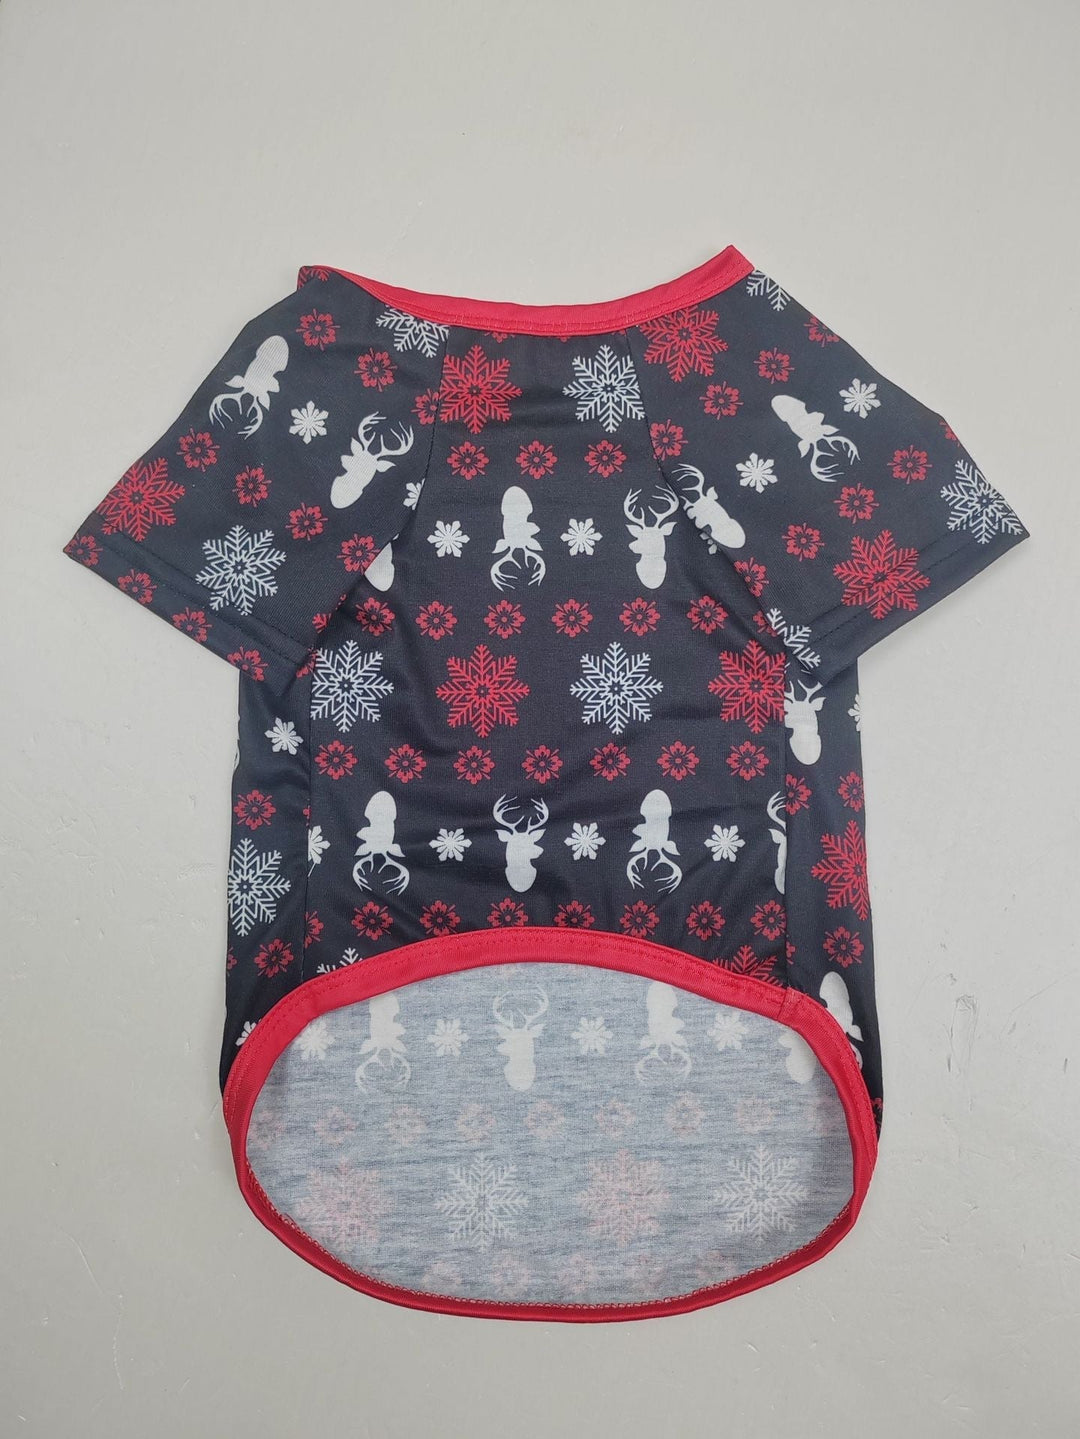 Red Christmas Snow Deer Fmalily Matching Pajamas Sets (with Pet's dog clothes)